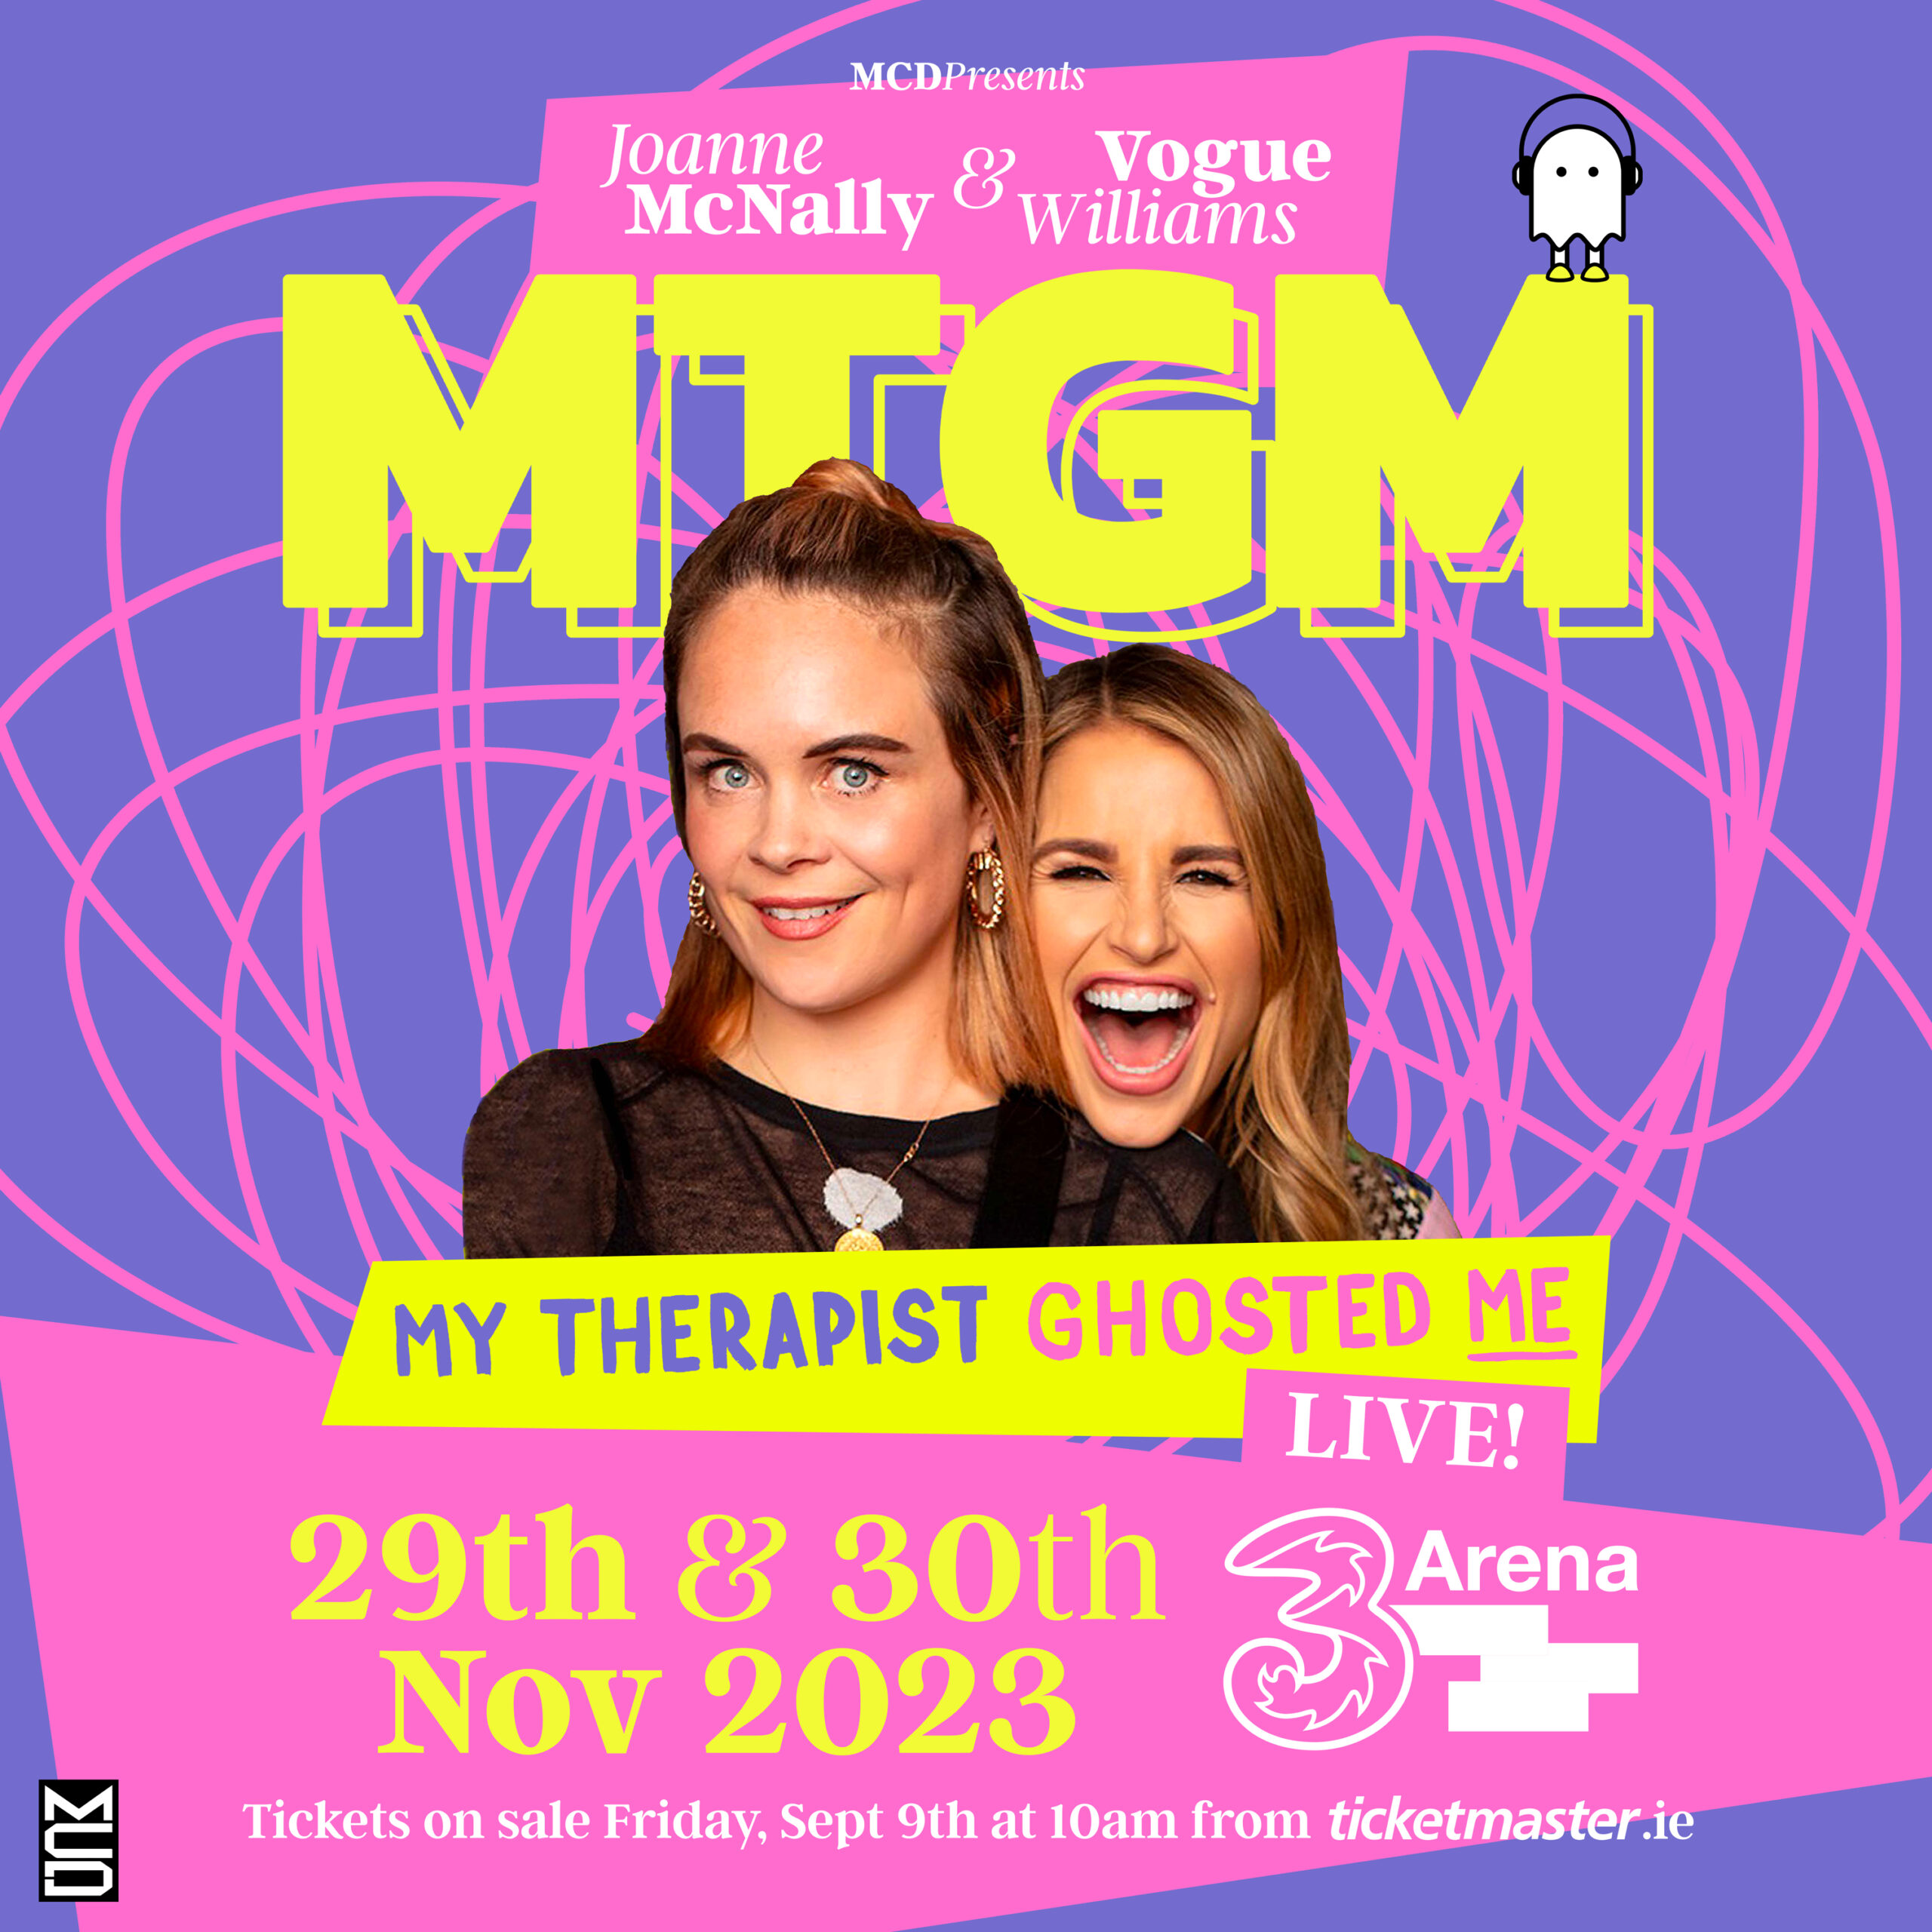 Joanne McNally & Vogue Williams My Therapist Ghosted Me Live Arena shows for November 2023!